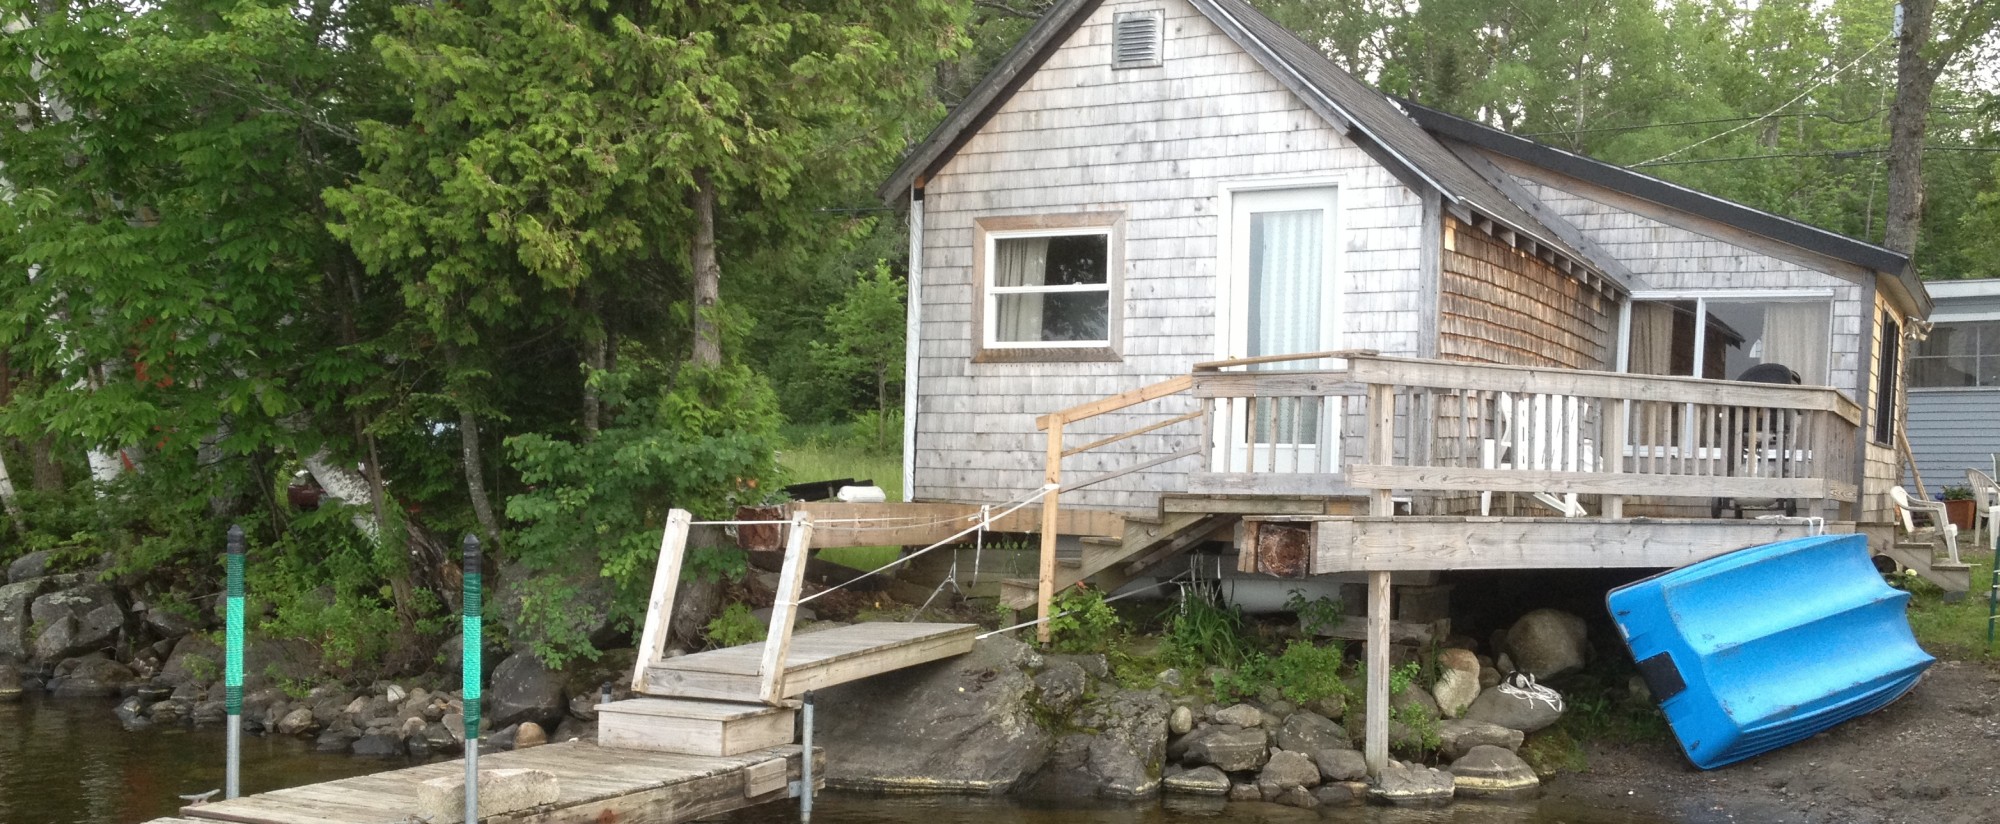 Sebec Lake Vacation Cottage | Lakefront Rental Camp in Maine